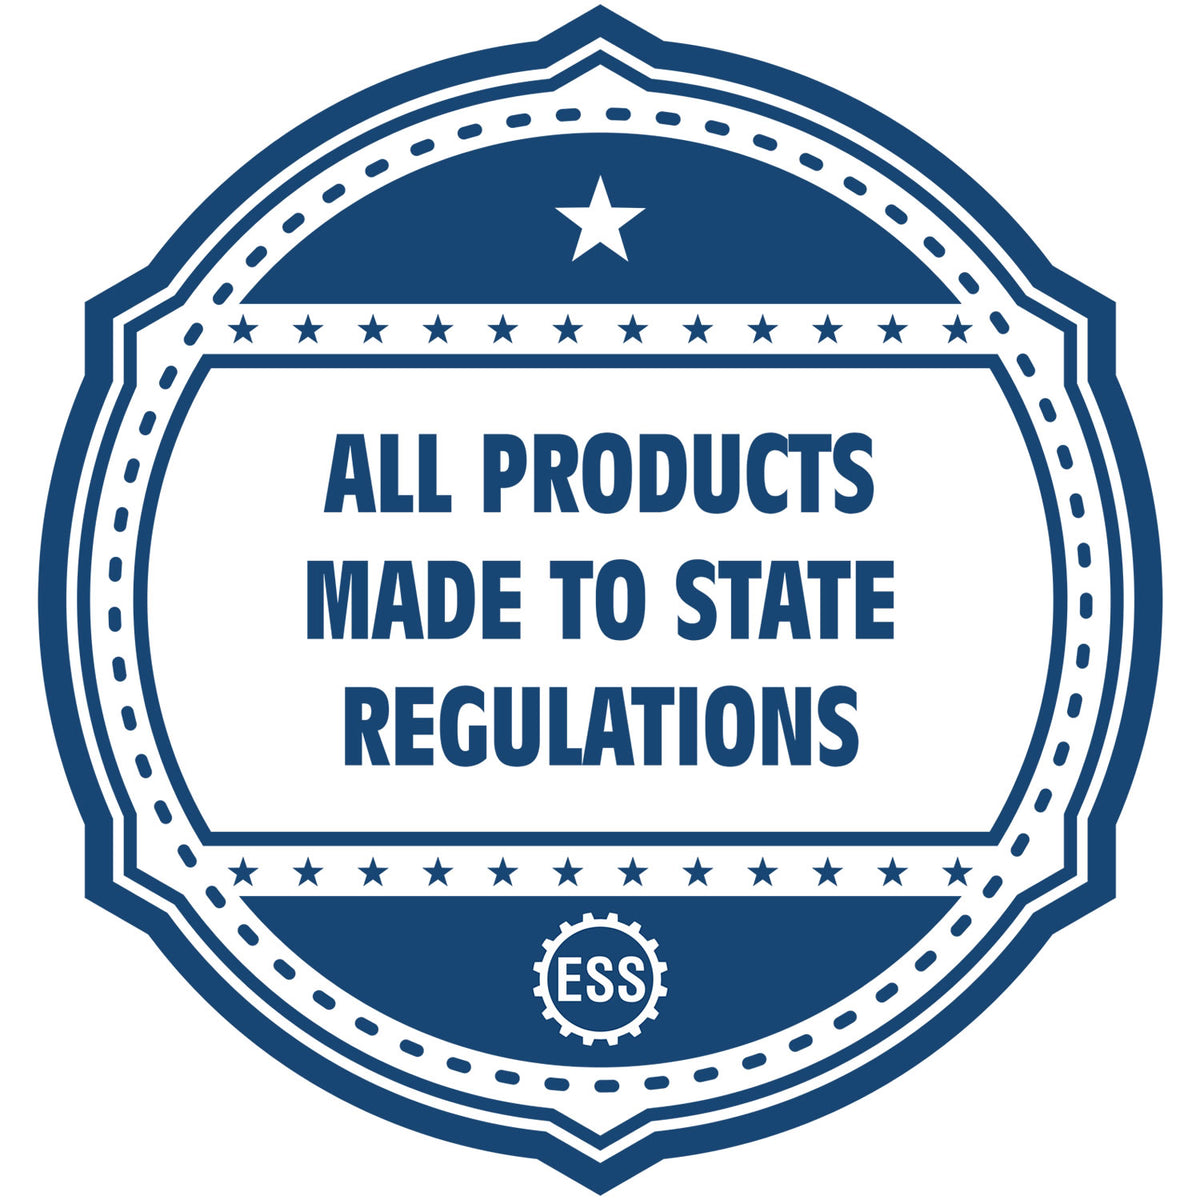 An icon or badge element for the Soft Oklahoma Professional Engineer Seal showing that this product is made in compliance with state regulations.